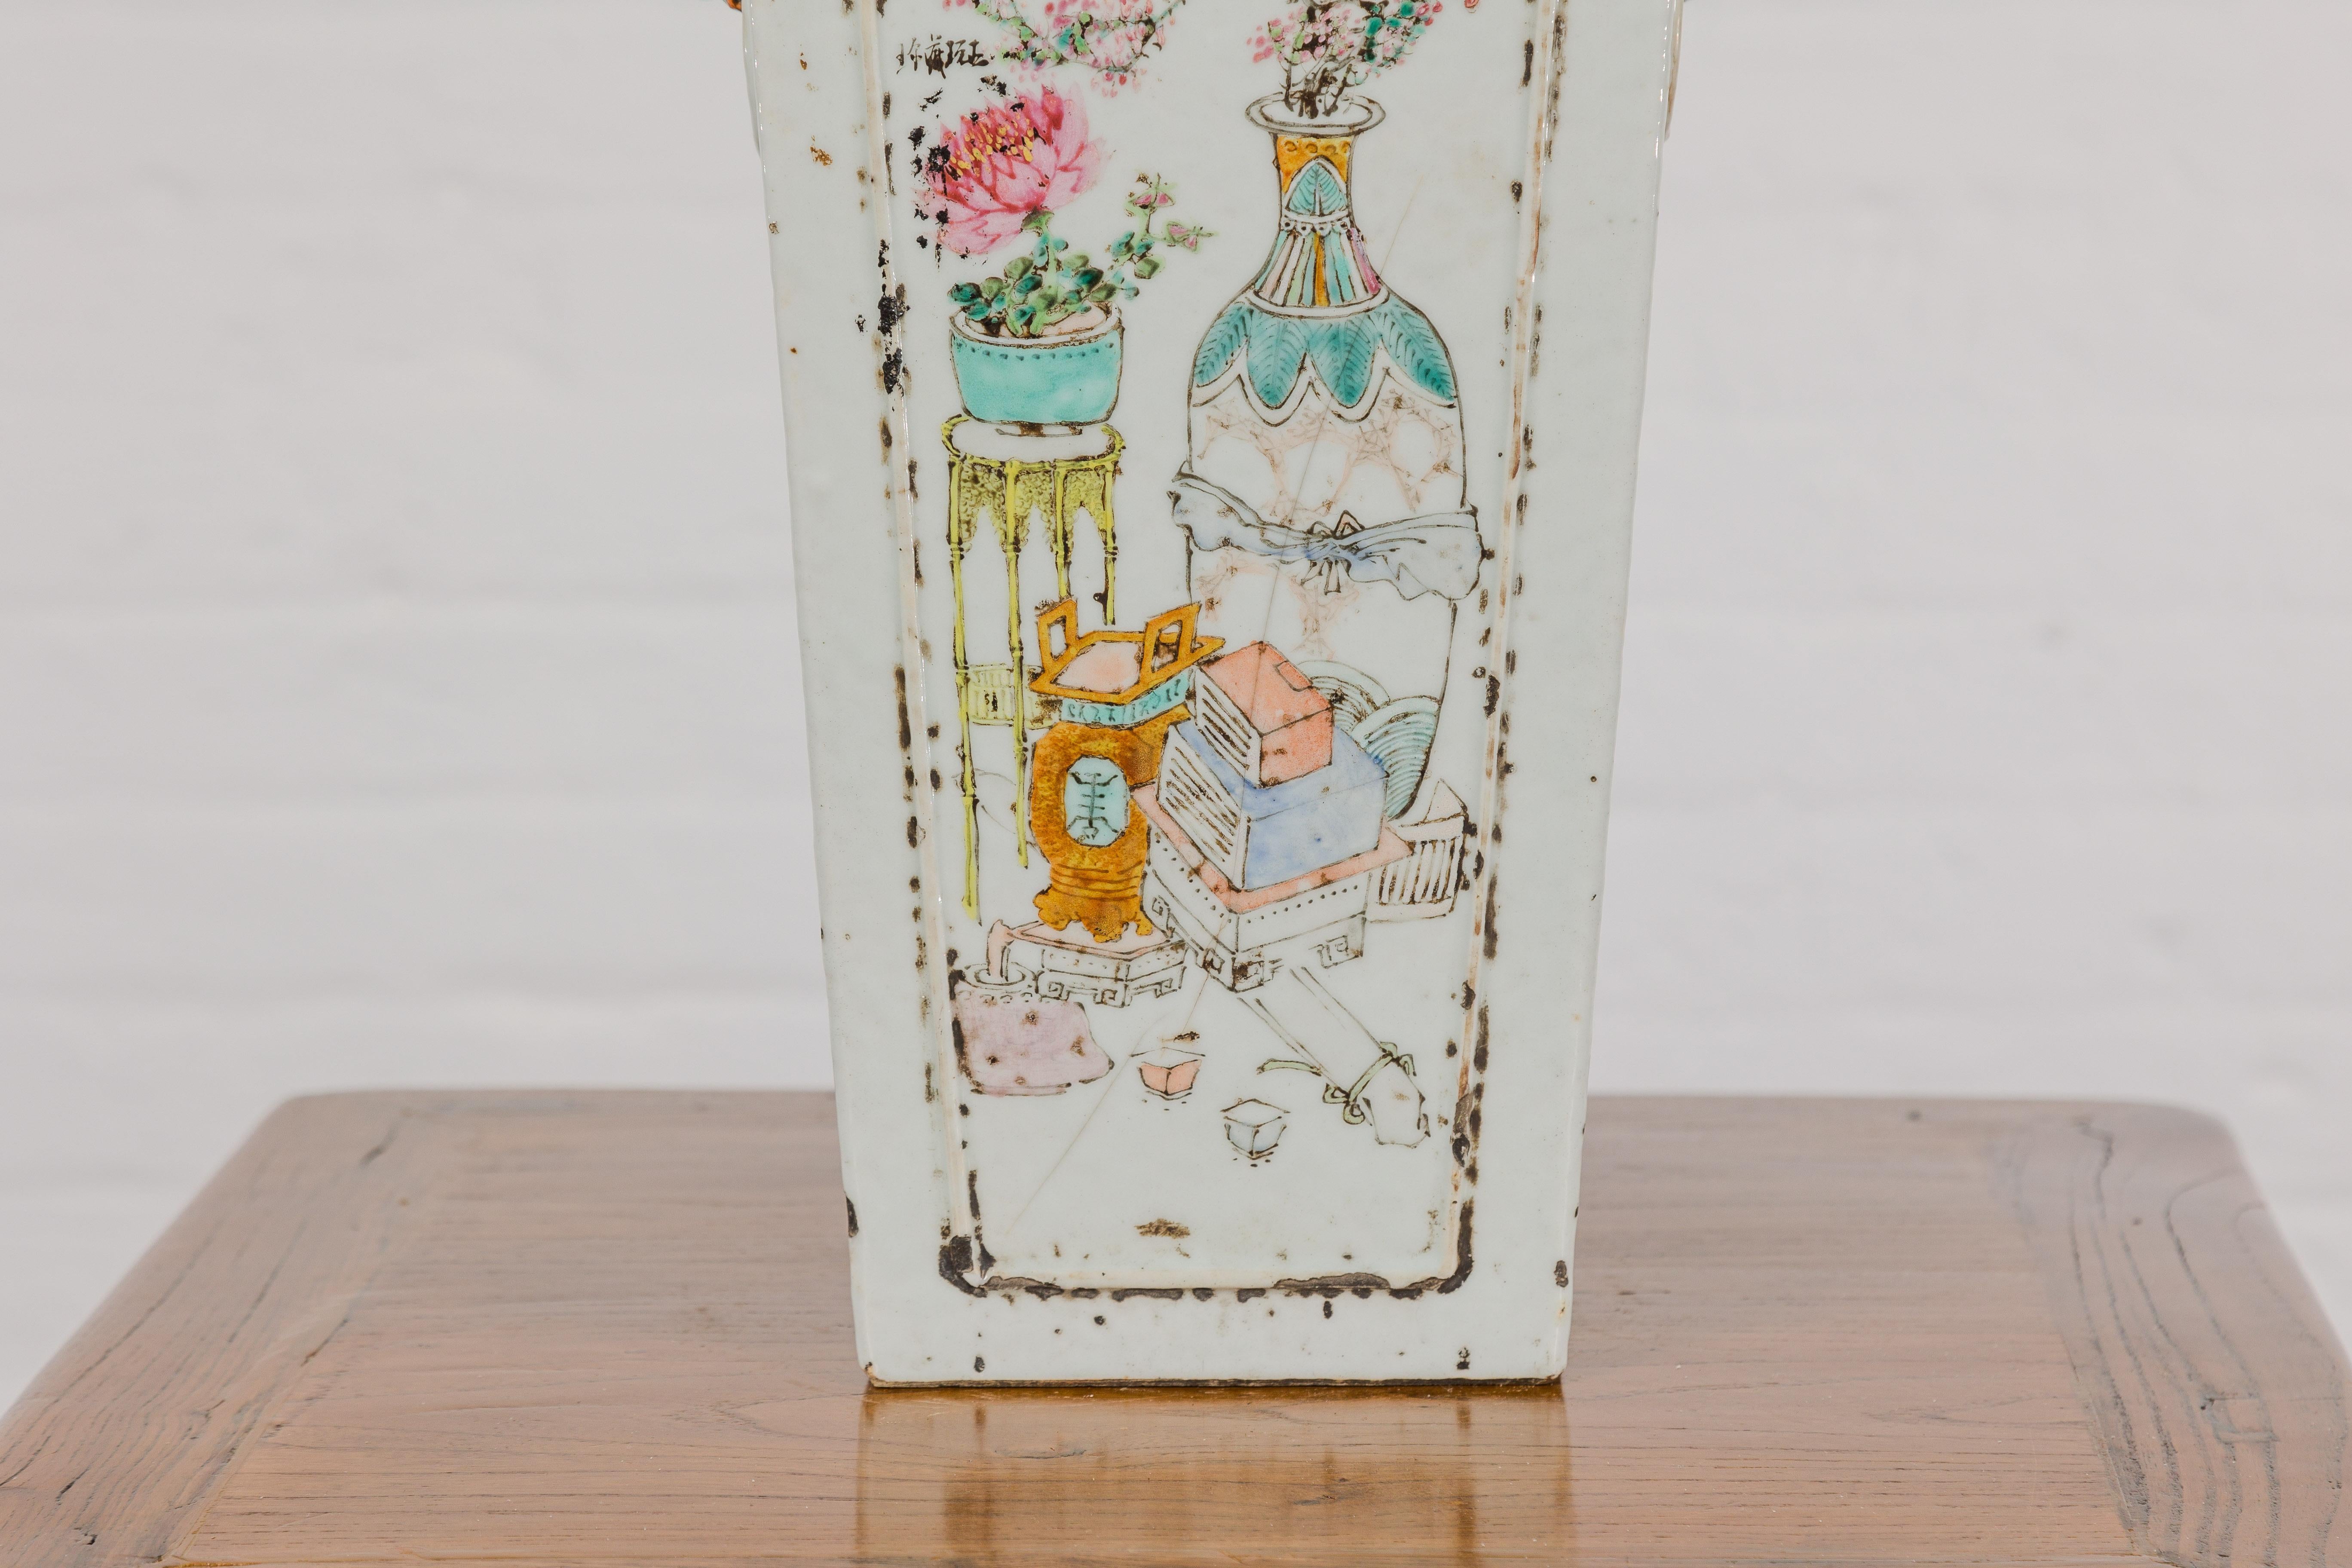 19th Century Qing Dynasty White Porcelain Vase with Painted Flowers, Objects and Calligraphy For Sale